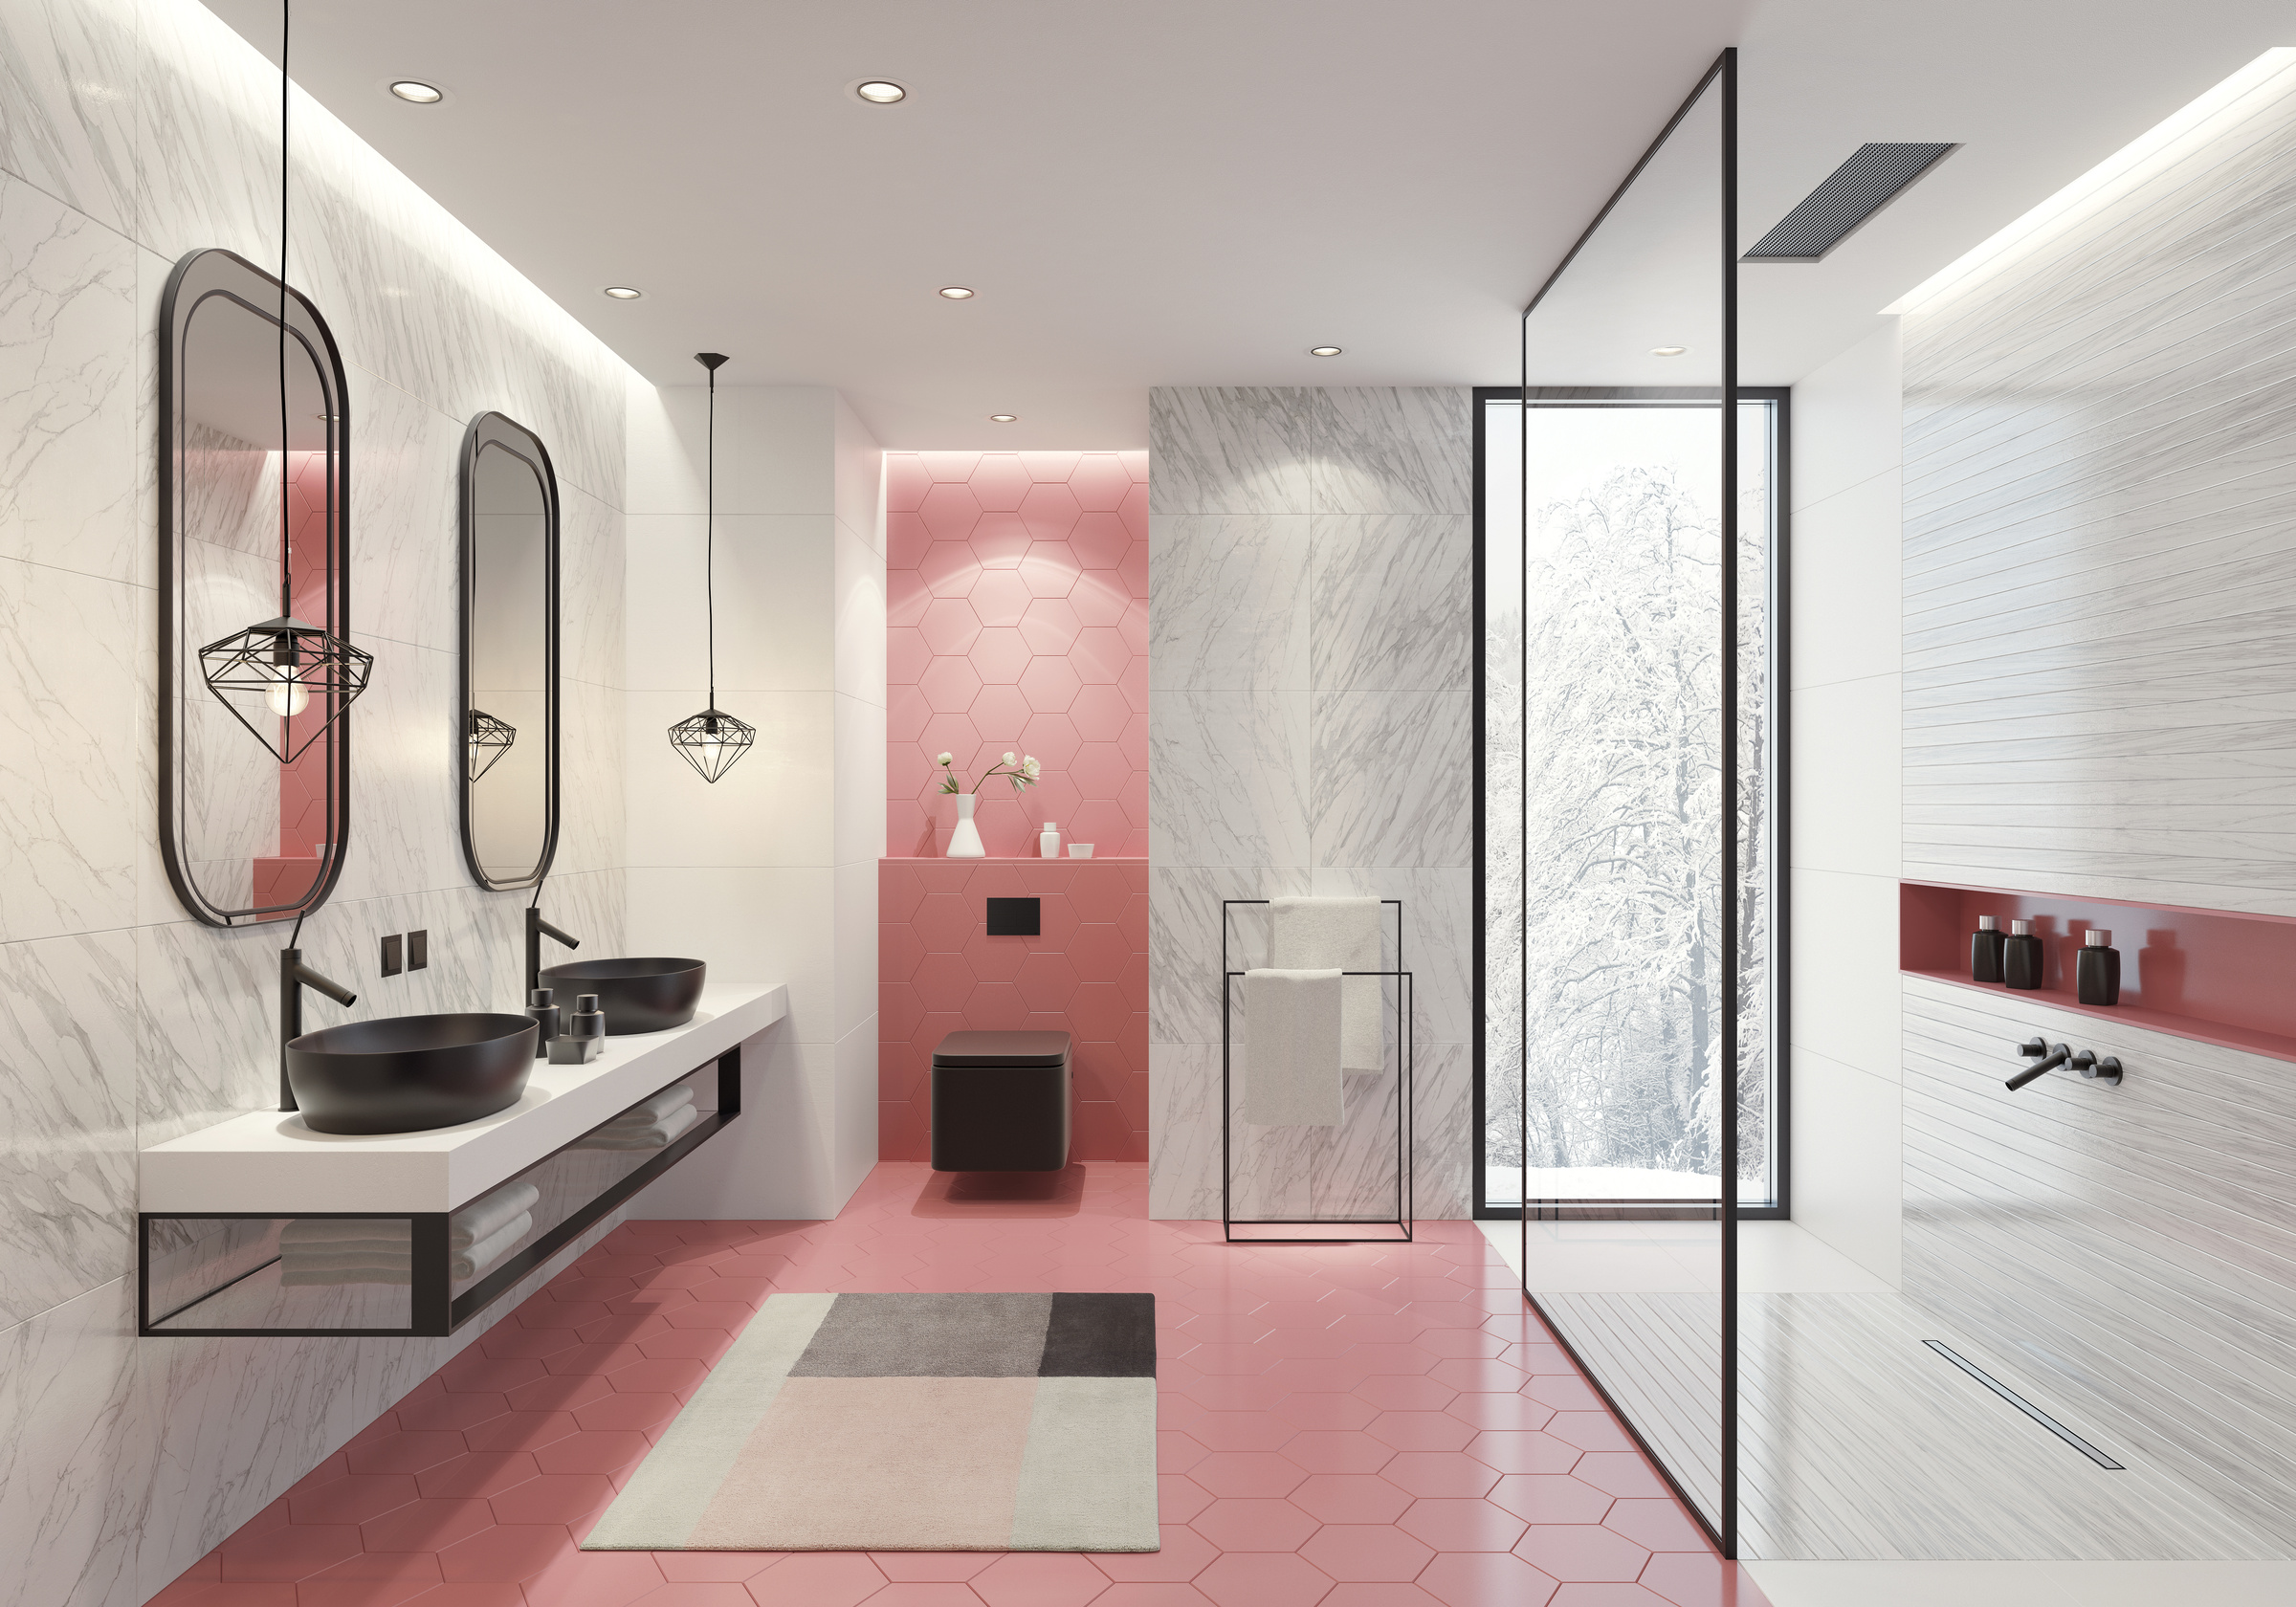 Contemporary bathroom with light pink honeycomb tiles